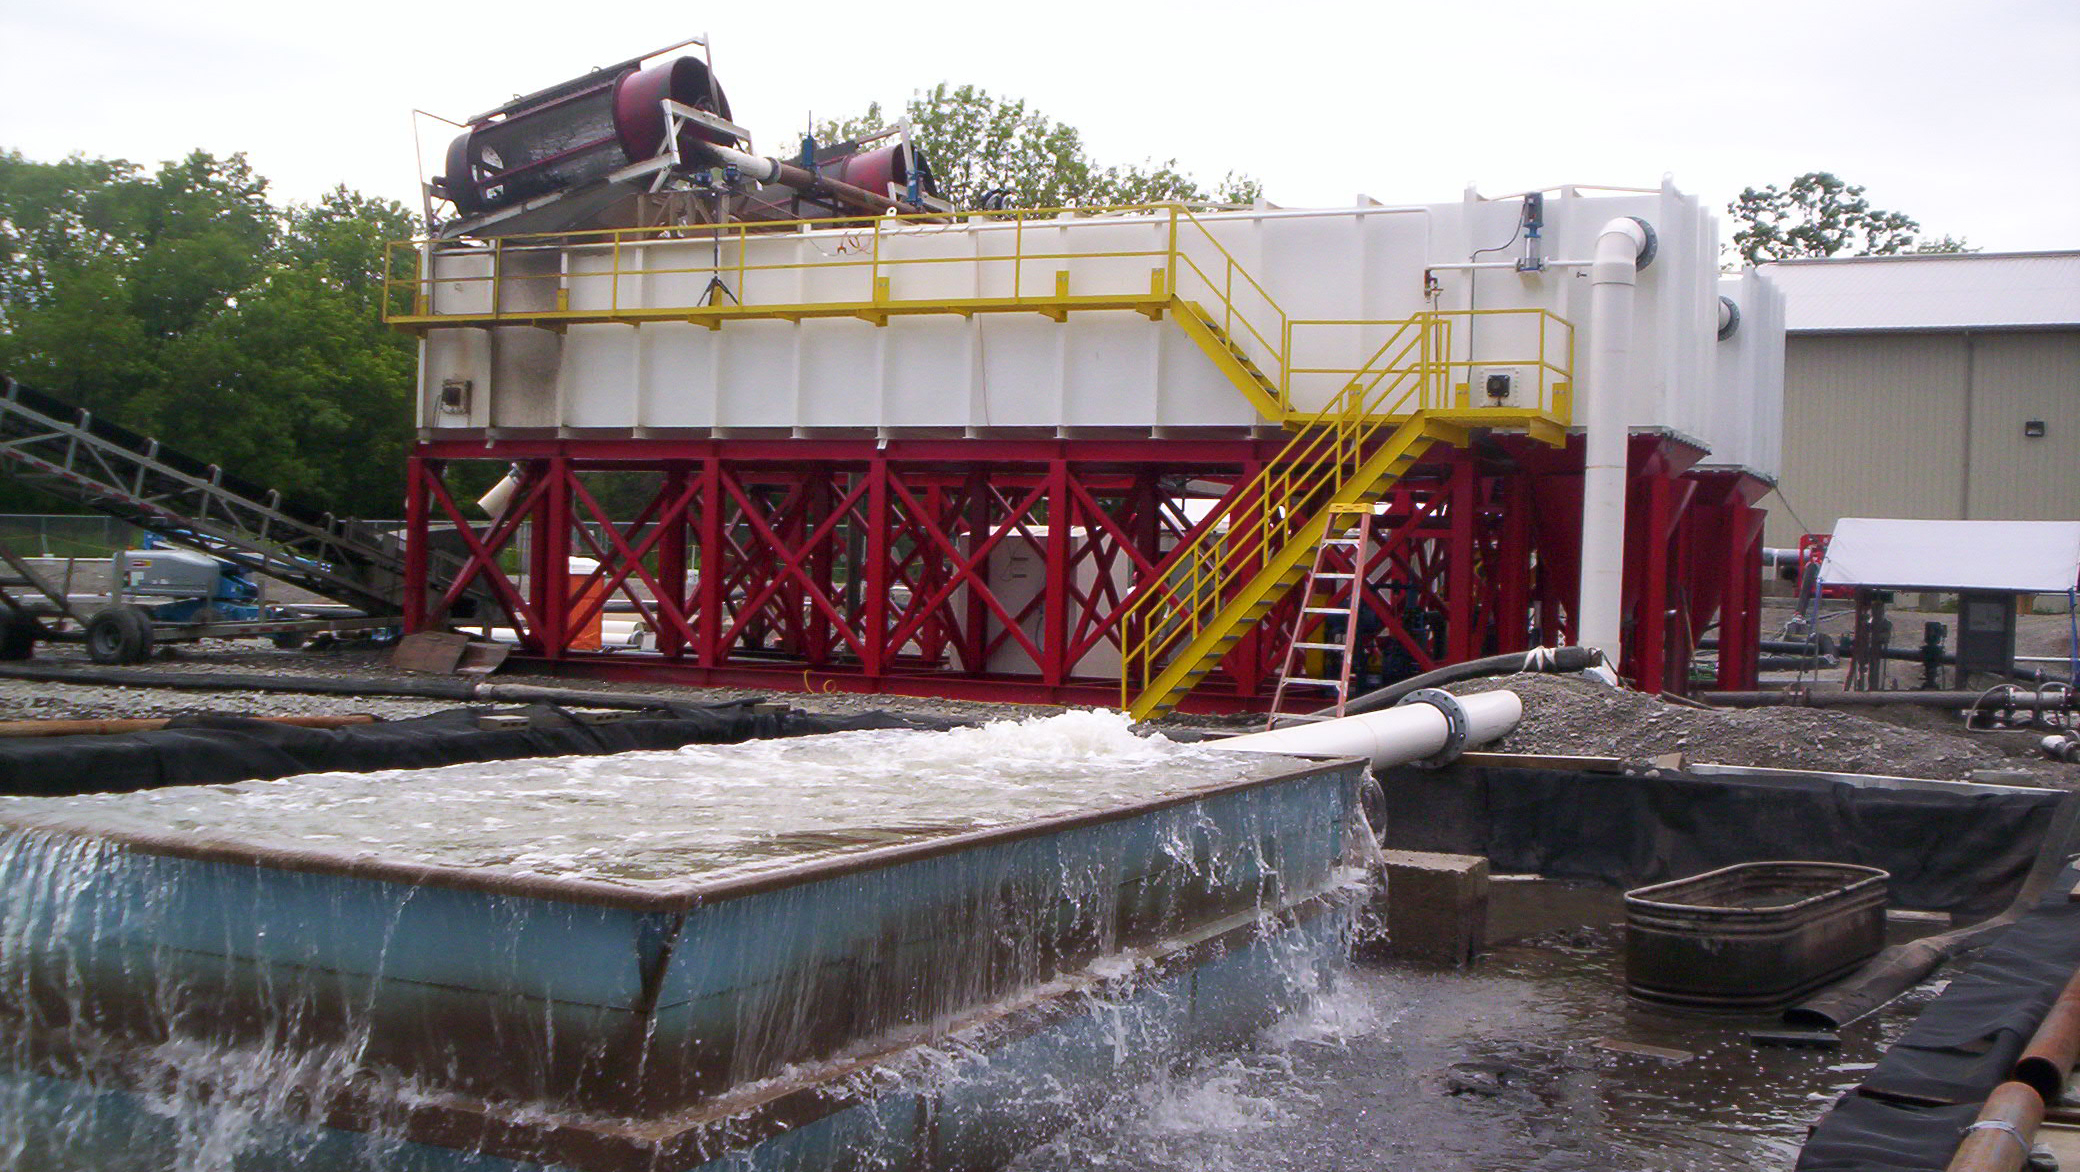 Large rectangular clarifiers in the background with rotary trommel screens on top of them and a clean water overflow basin in the foreground.